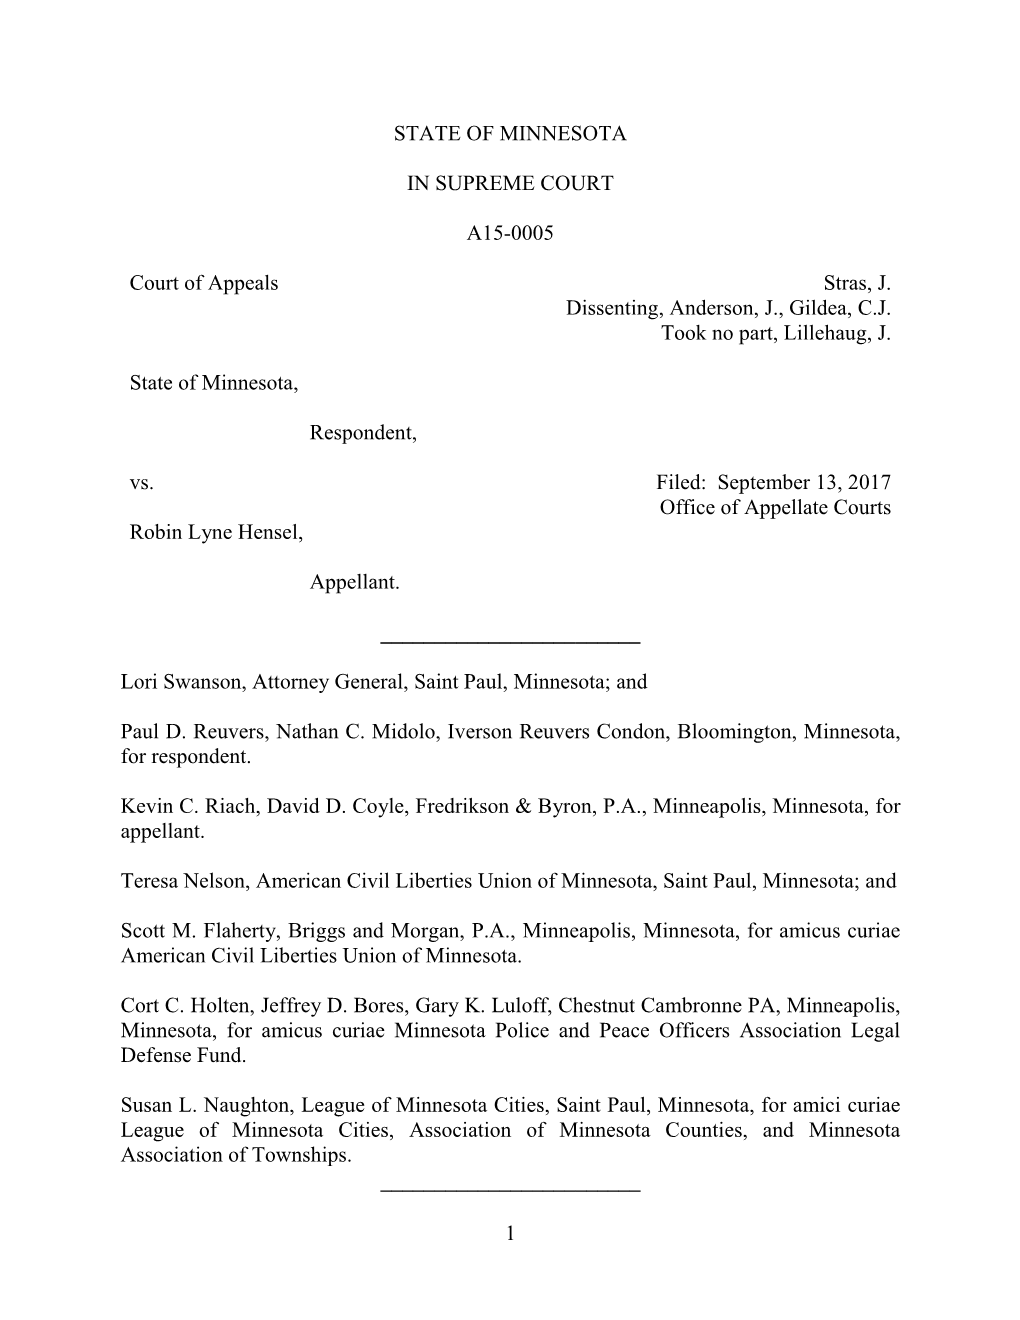 1 State of Minnesota in Supreme Court A15-0005